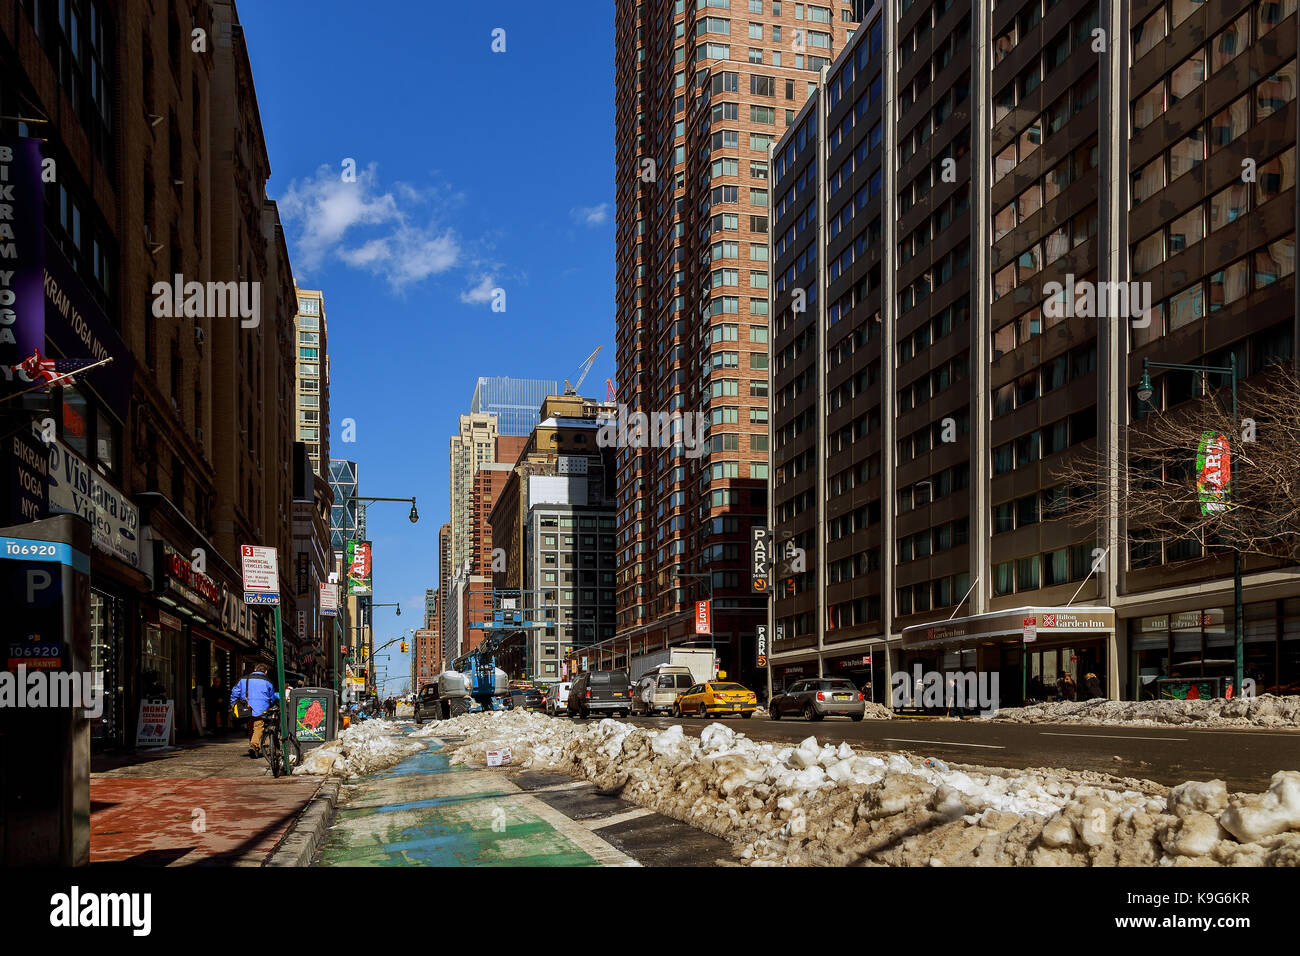 NEW YORK CITY - February 27, 2017: NEW YORK CITY - February 27, 2017: Some town in New york city after snow storm, Winter is coming by snow, in New Yo Stock Photo